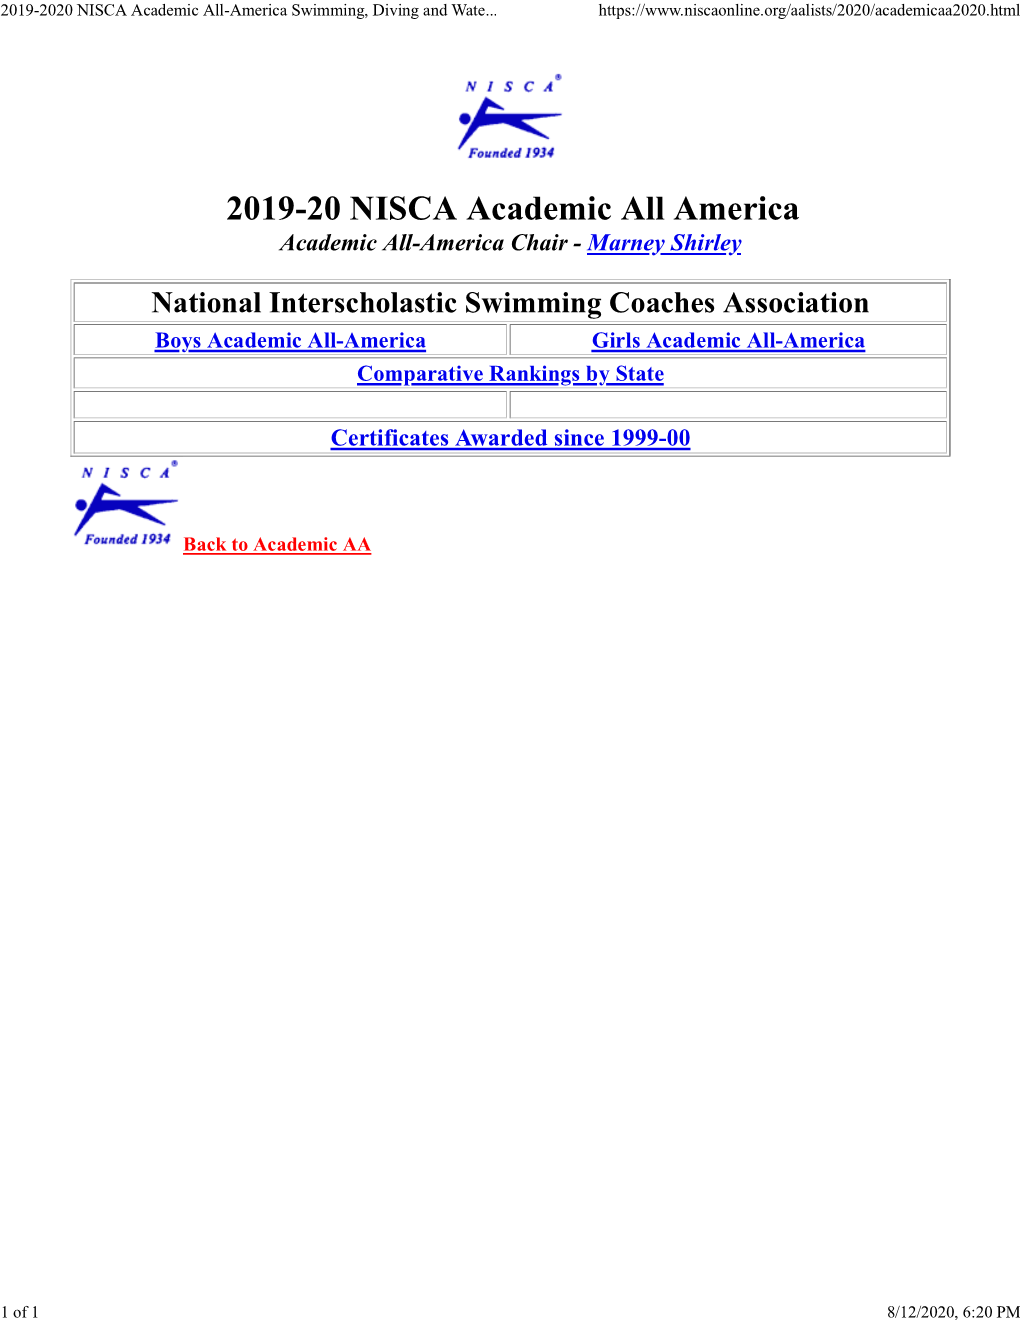 2019-2020 NISCA Academic All-America Swimming, Diving and Wate